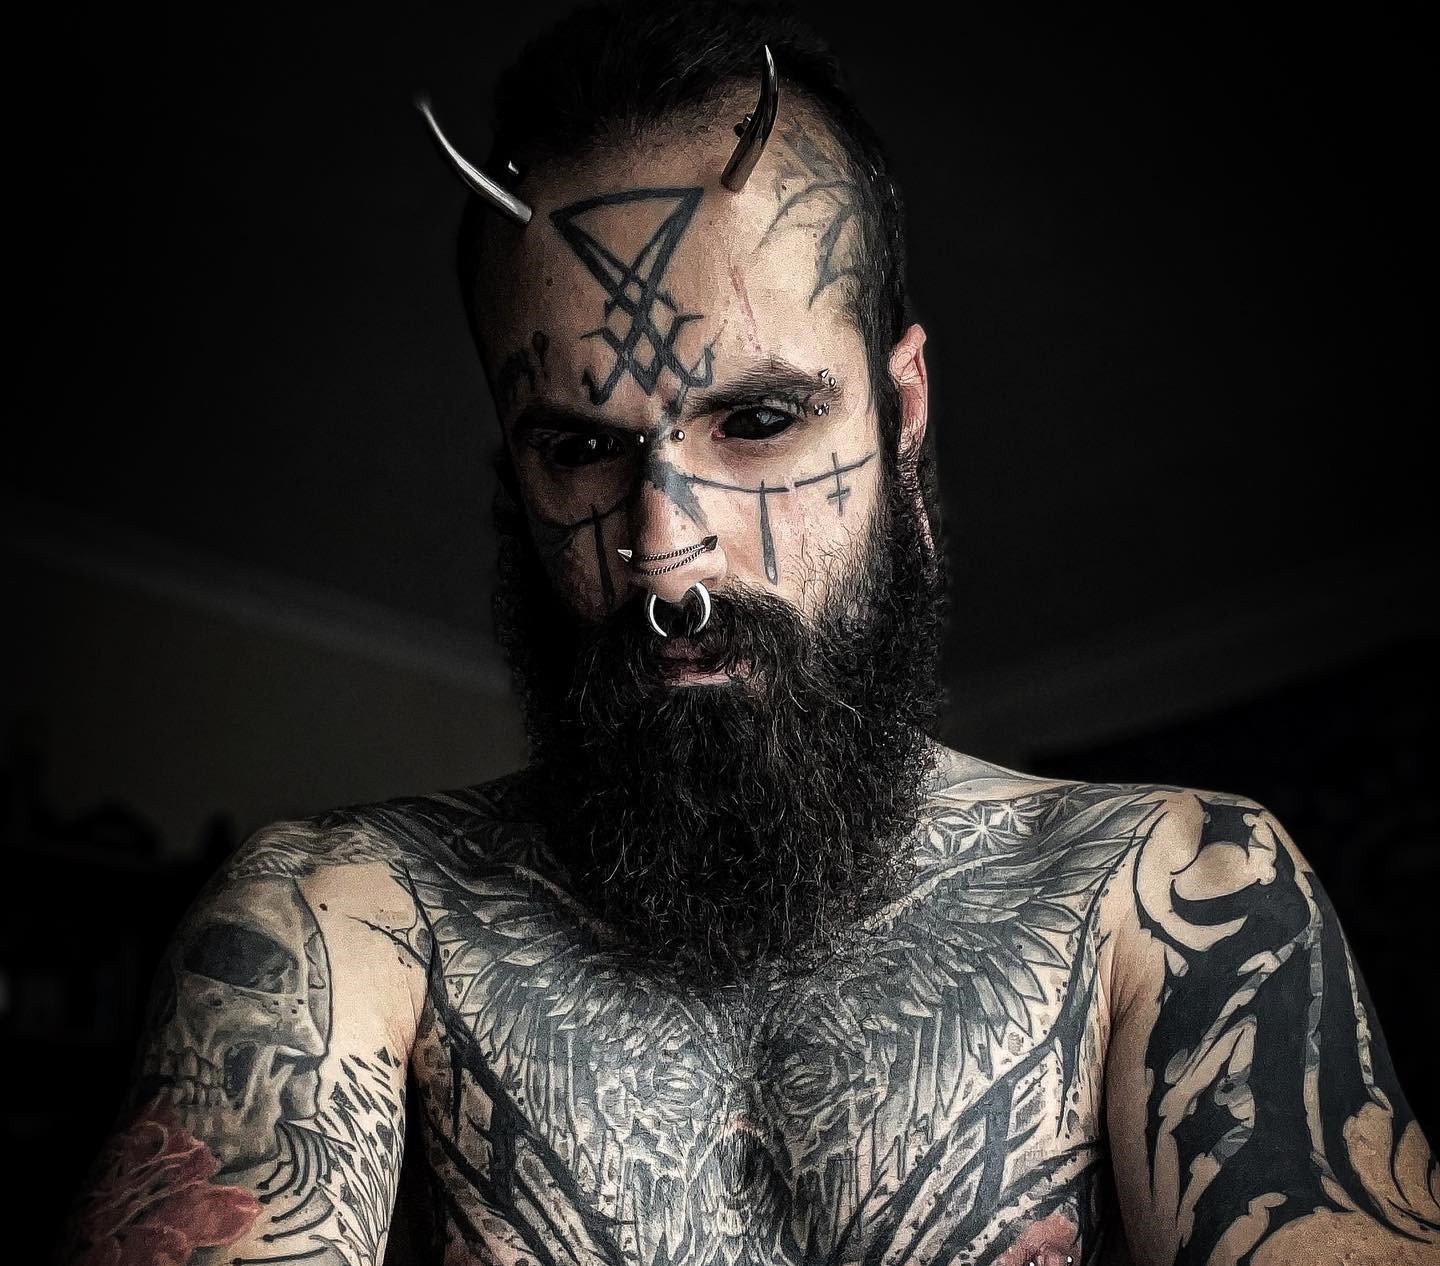 An ink enthusiast, Mattia, has spent over £25,000 on tattoos and body modifications, including eyeball tattoos and metal horns, despite facing criticism from family and friends. He embraces his unique appearance, stating that others' opinions are irrelevant. Despite challenges, he plans to continue modifying his body, emphasizing the importance of thorough research and personal desire in body modification.